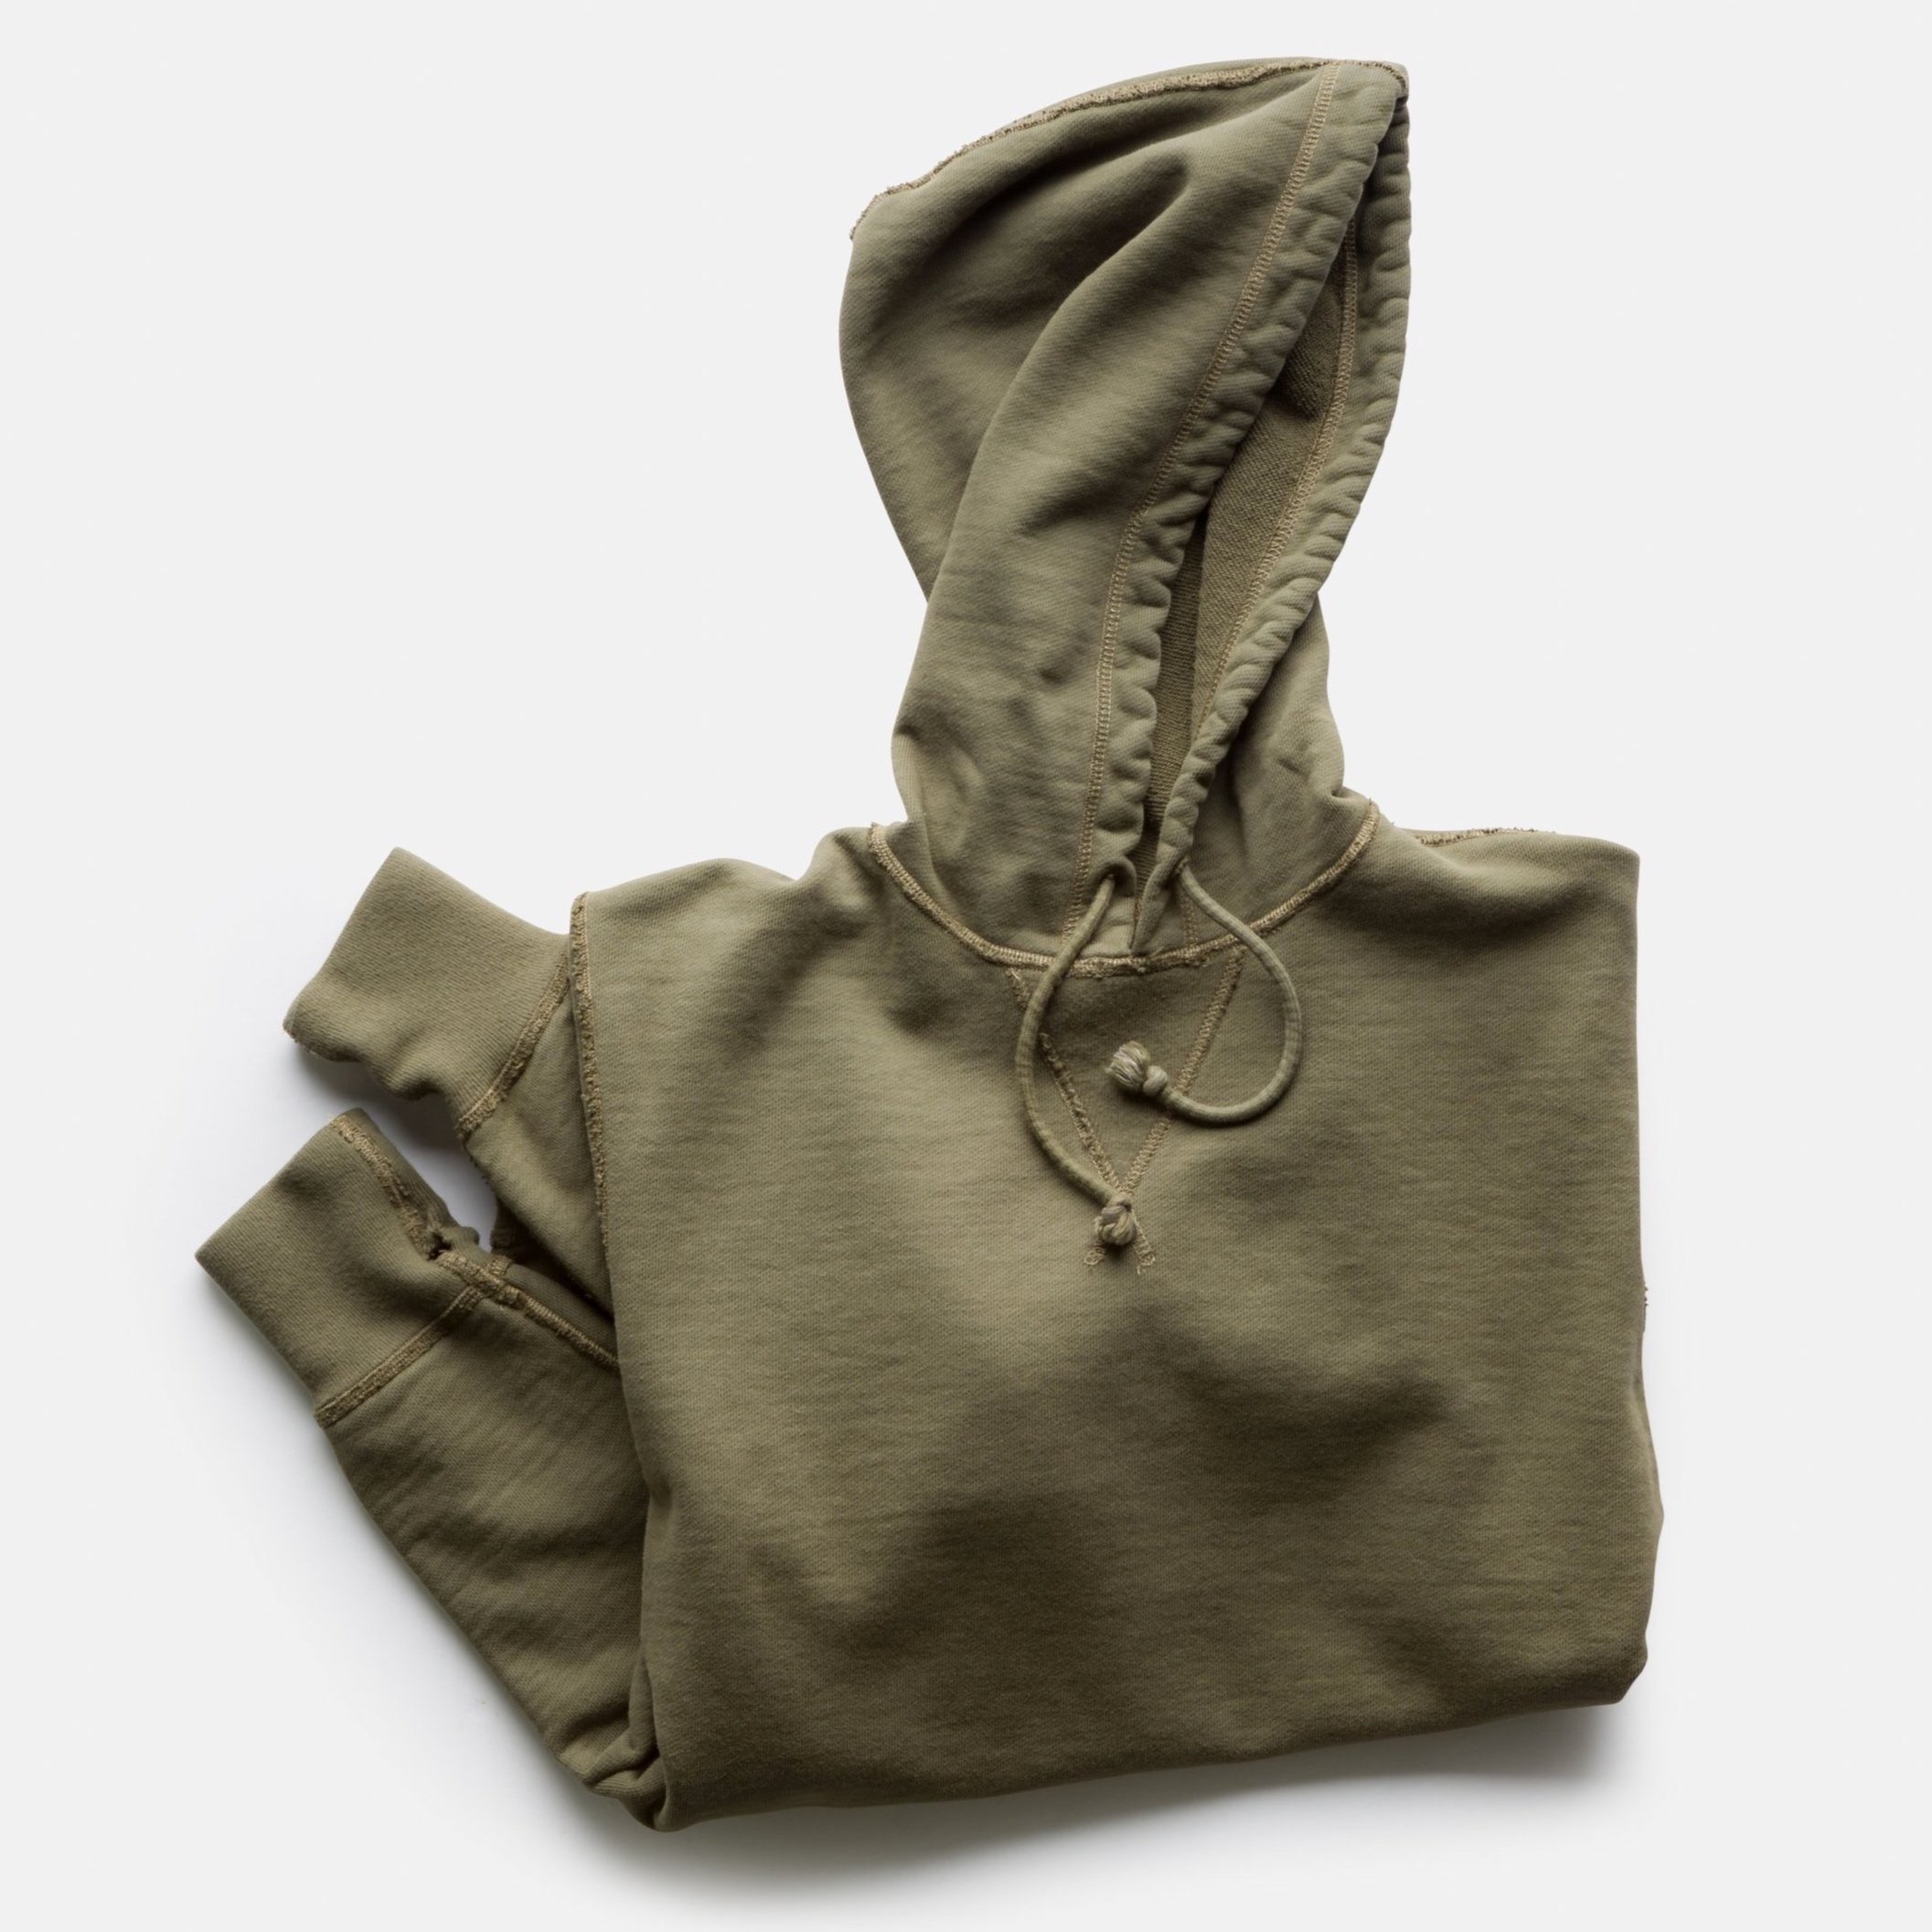 inely crafted 30 oz. Terry hoody from Black Bear Brand,